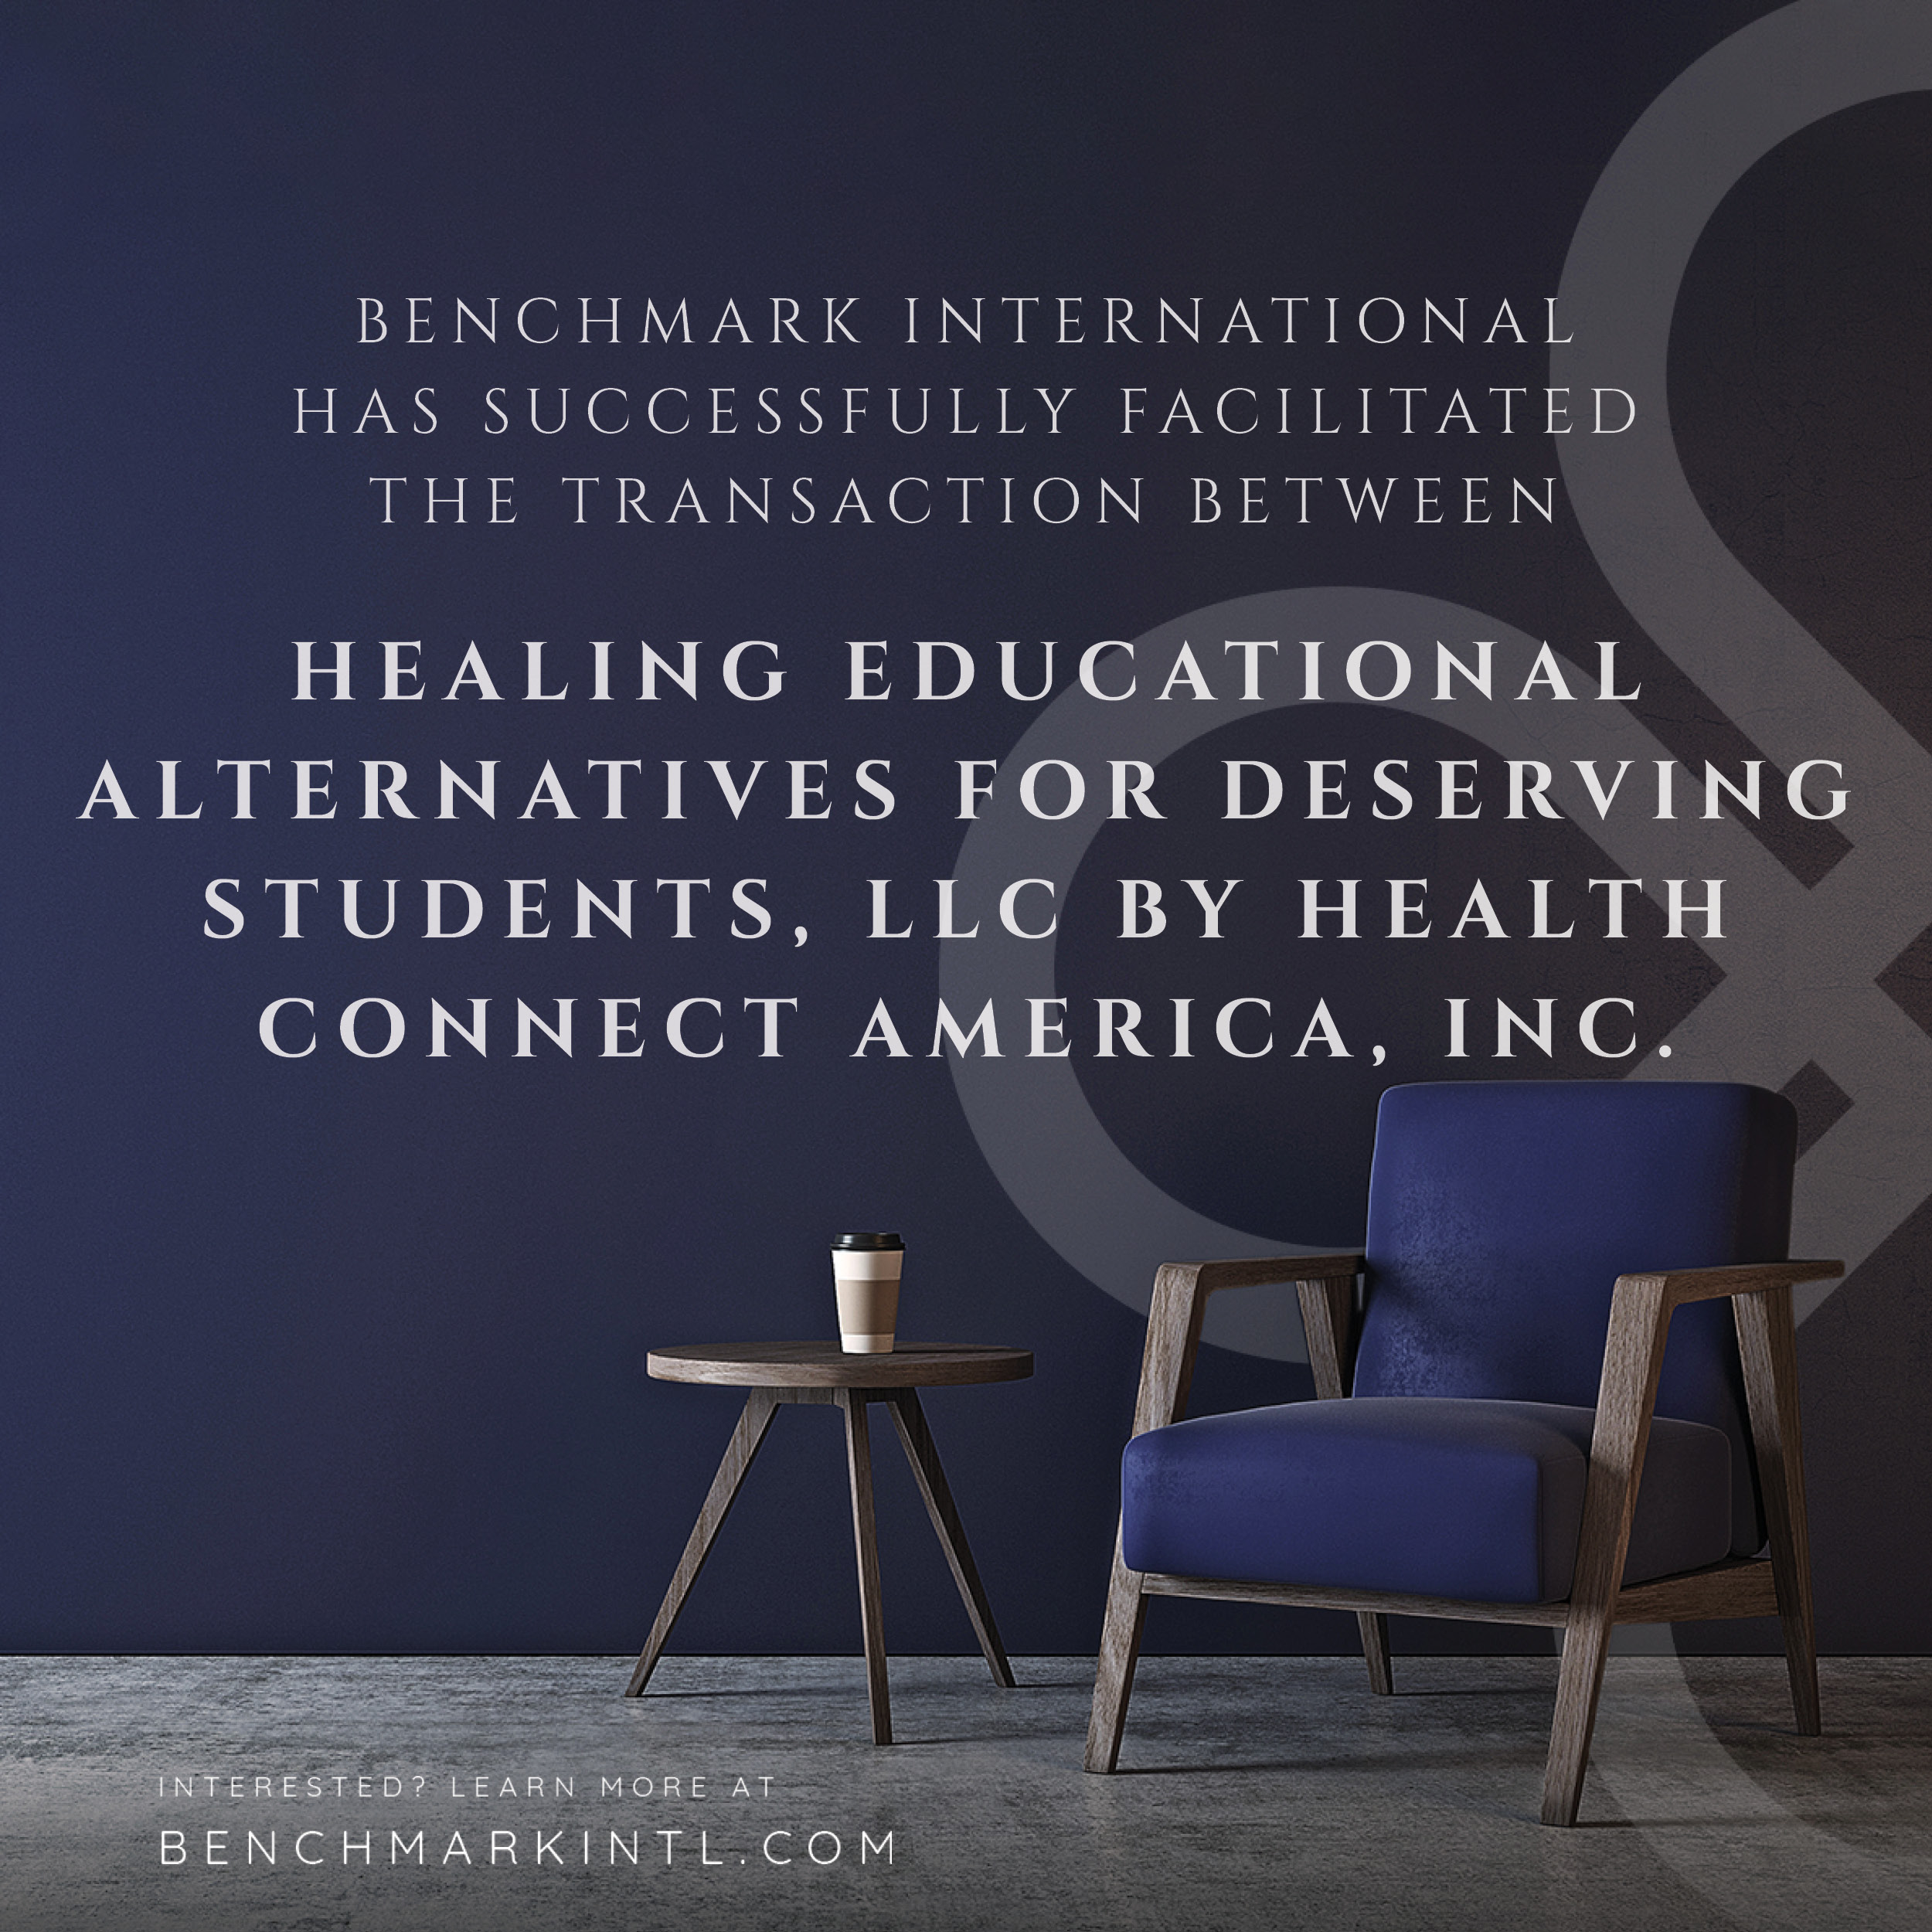 Deal_Completion_Healing_Educational_Alternatives_For_Deserving_Students_By_Health_Connect_America_Inc.2